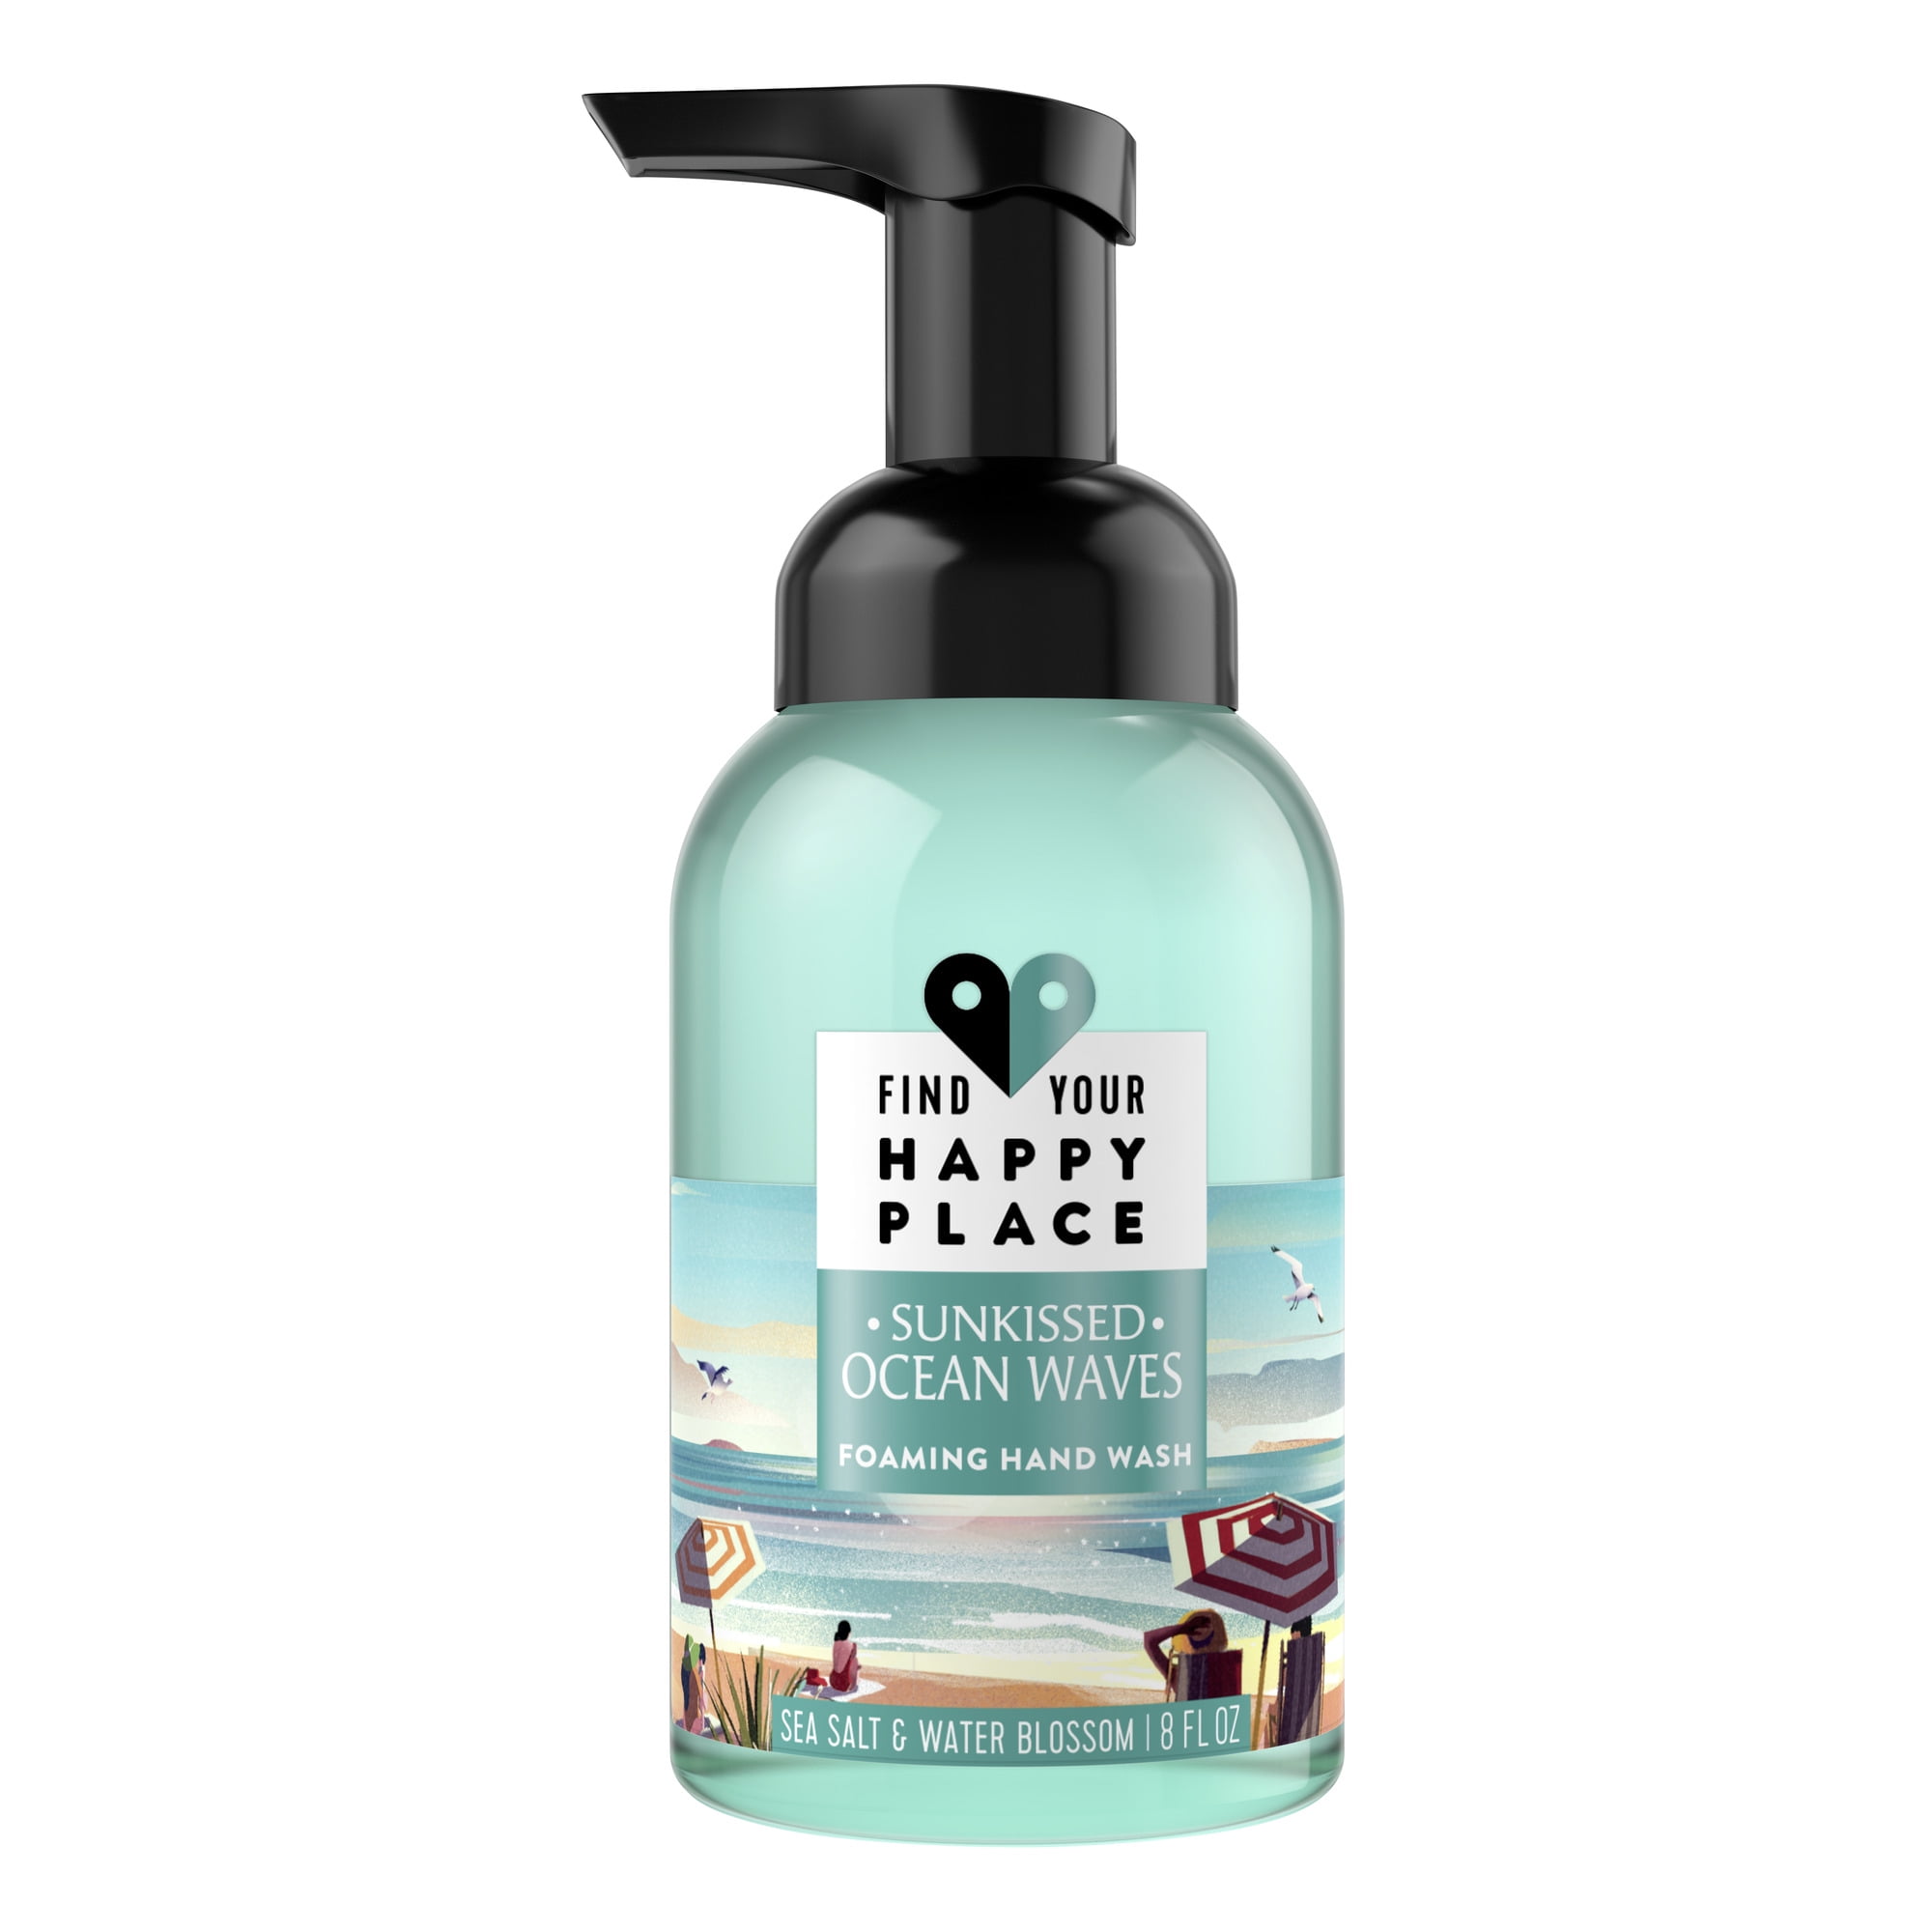 Find Your Happy Place Foaming Liquid Hand Wash Sunkissed Ocean Waves 8 fl oz